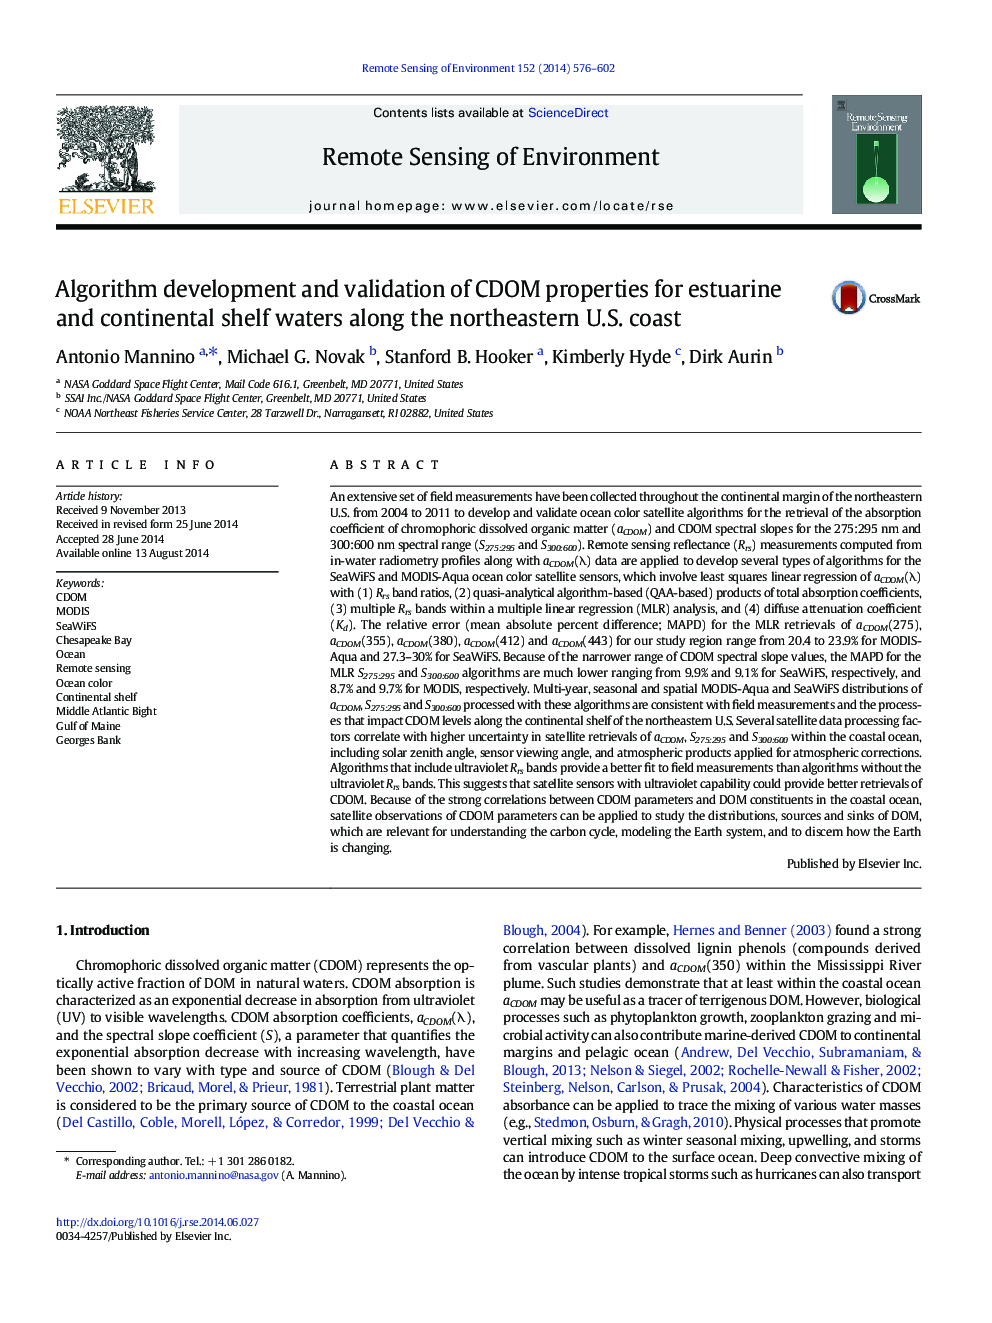 Algorithm development and validation of CDOM properties for estuarine and continental shelf waters along the northeastern U.S. coast